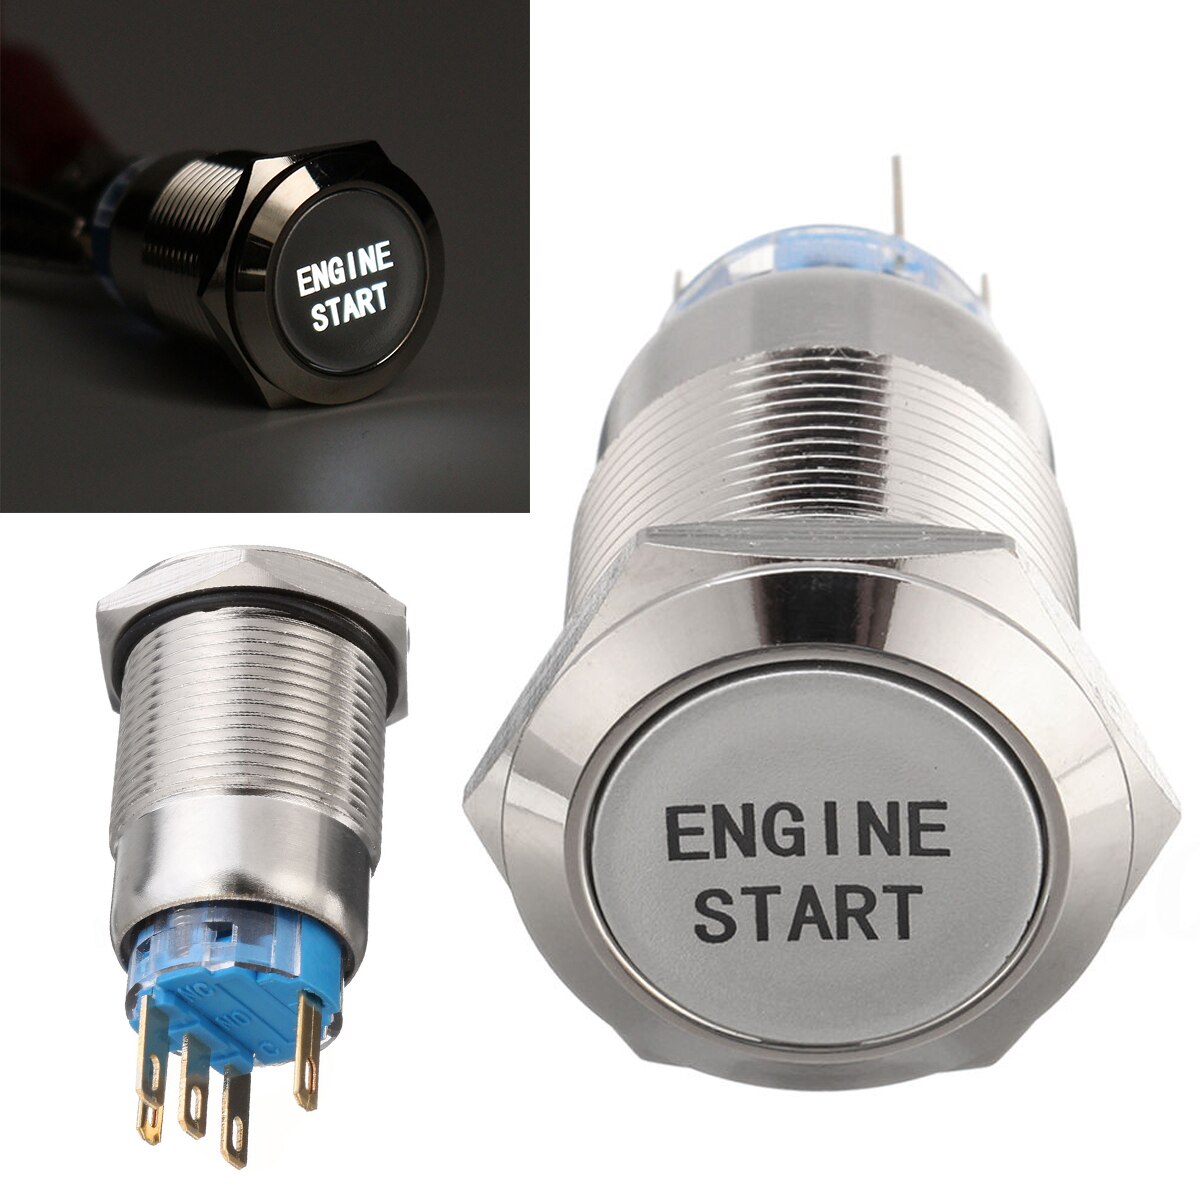 12V 19mm Waterproof Car Metal Momentary Engine Start Push Button Switch LED White